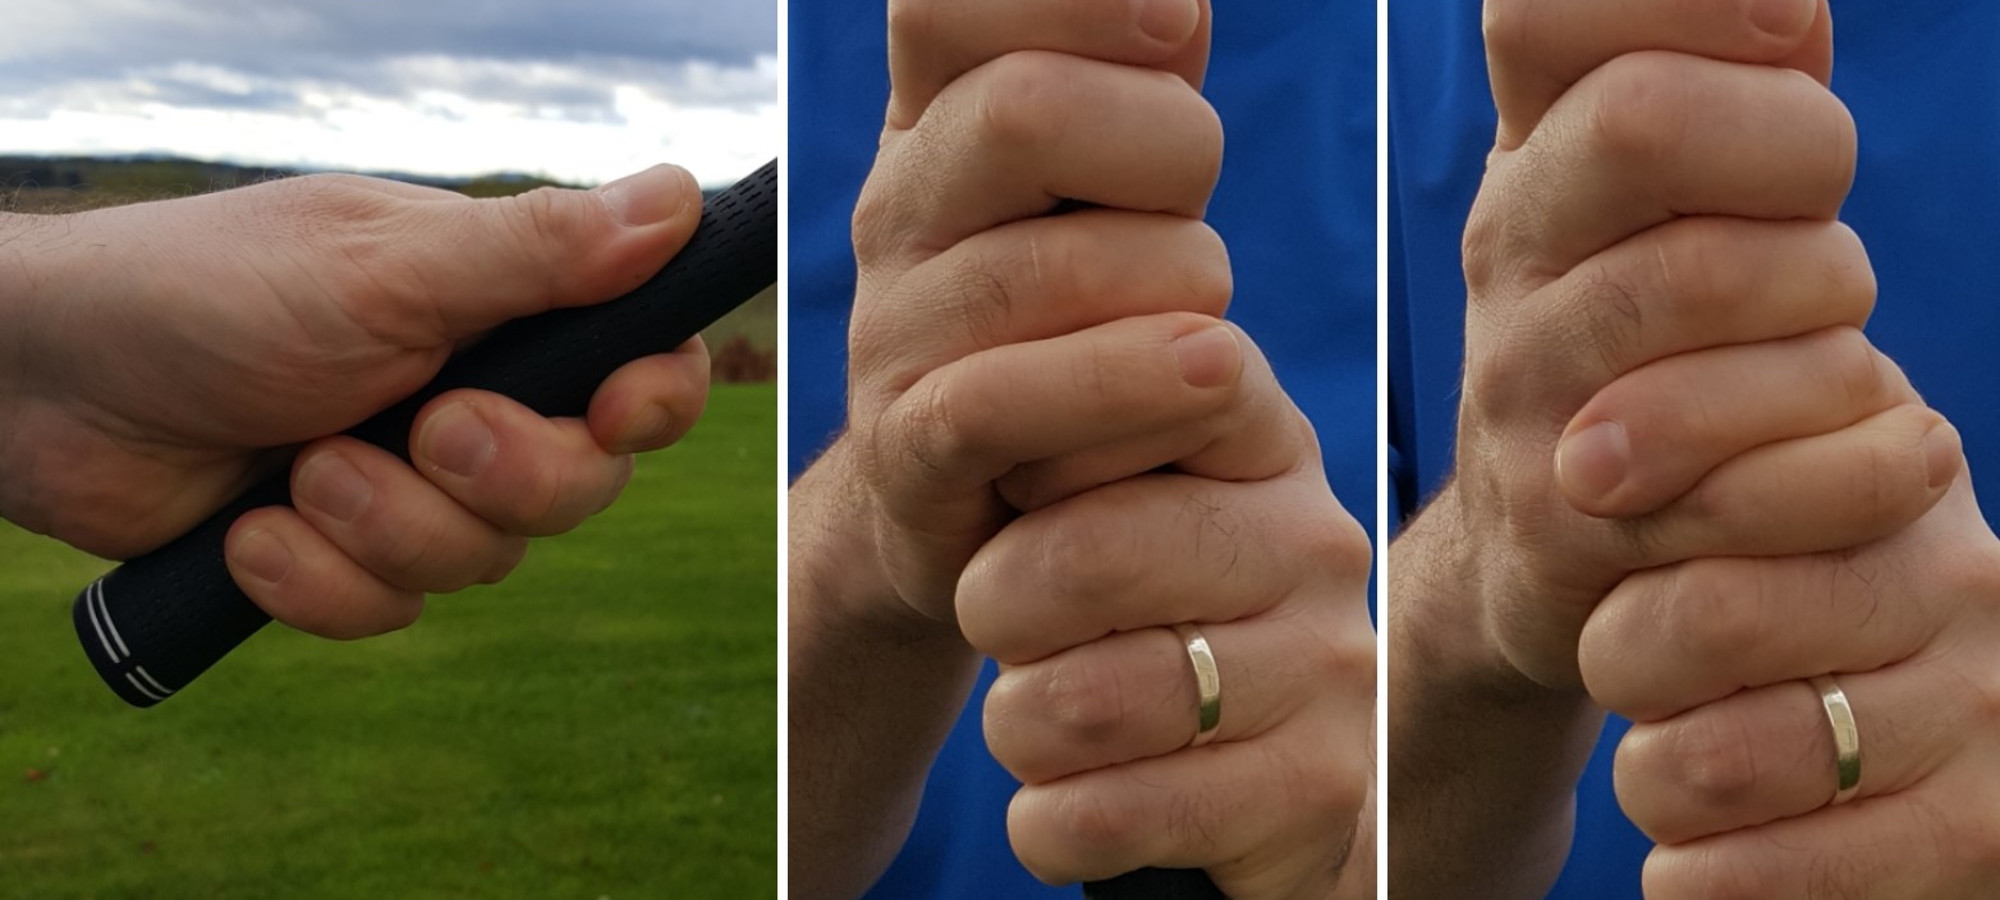 Blog: extra thoughts on the golf grip